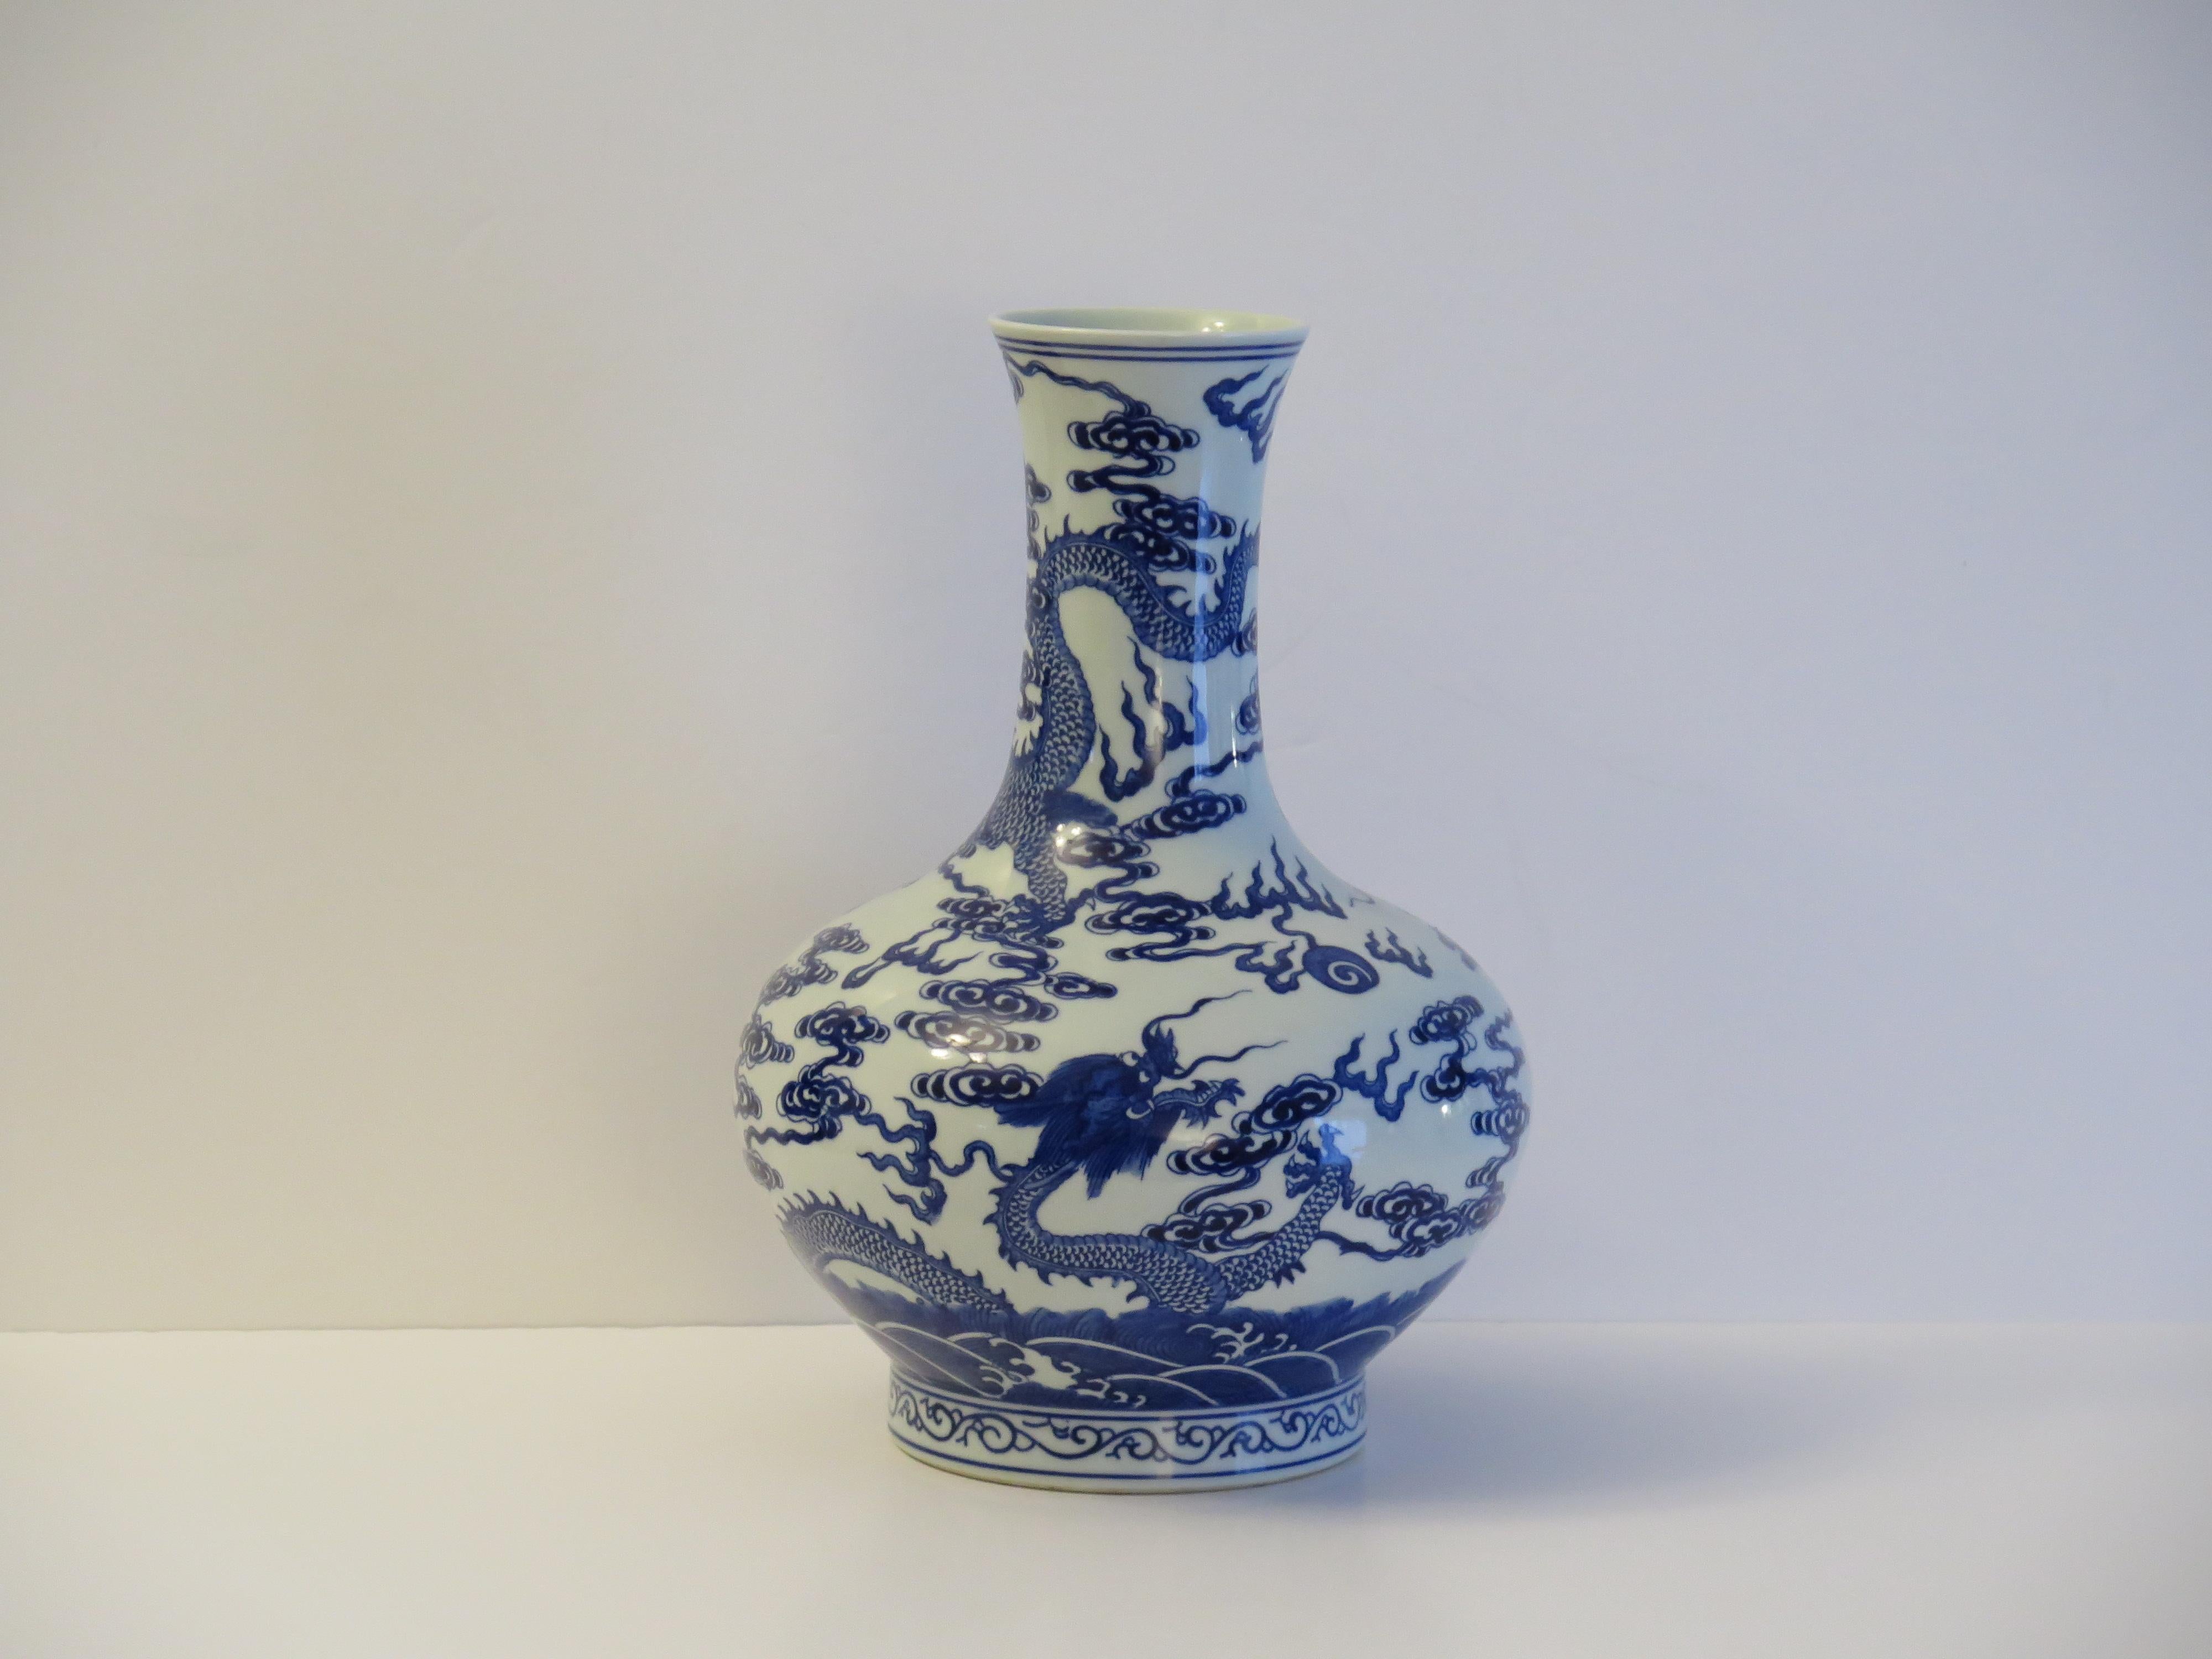 This is an elegant porcelain Chinese export porcelain Bottle Vase raised on a low foot, all hand painted in a blue and white dragon pattern, which we date to the mid 20th century, circa 1950s.

The vase is very well hand potted in a Classic bottle